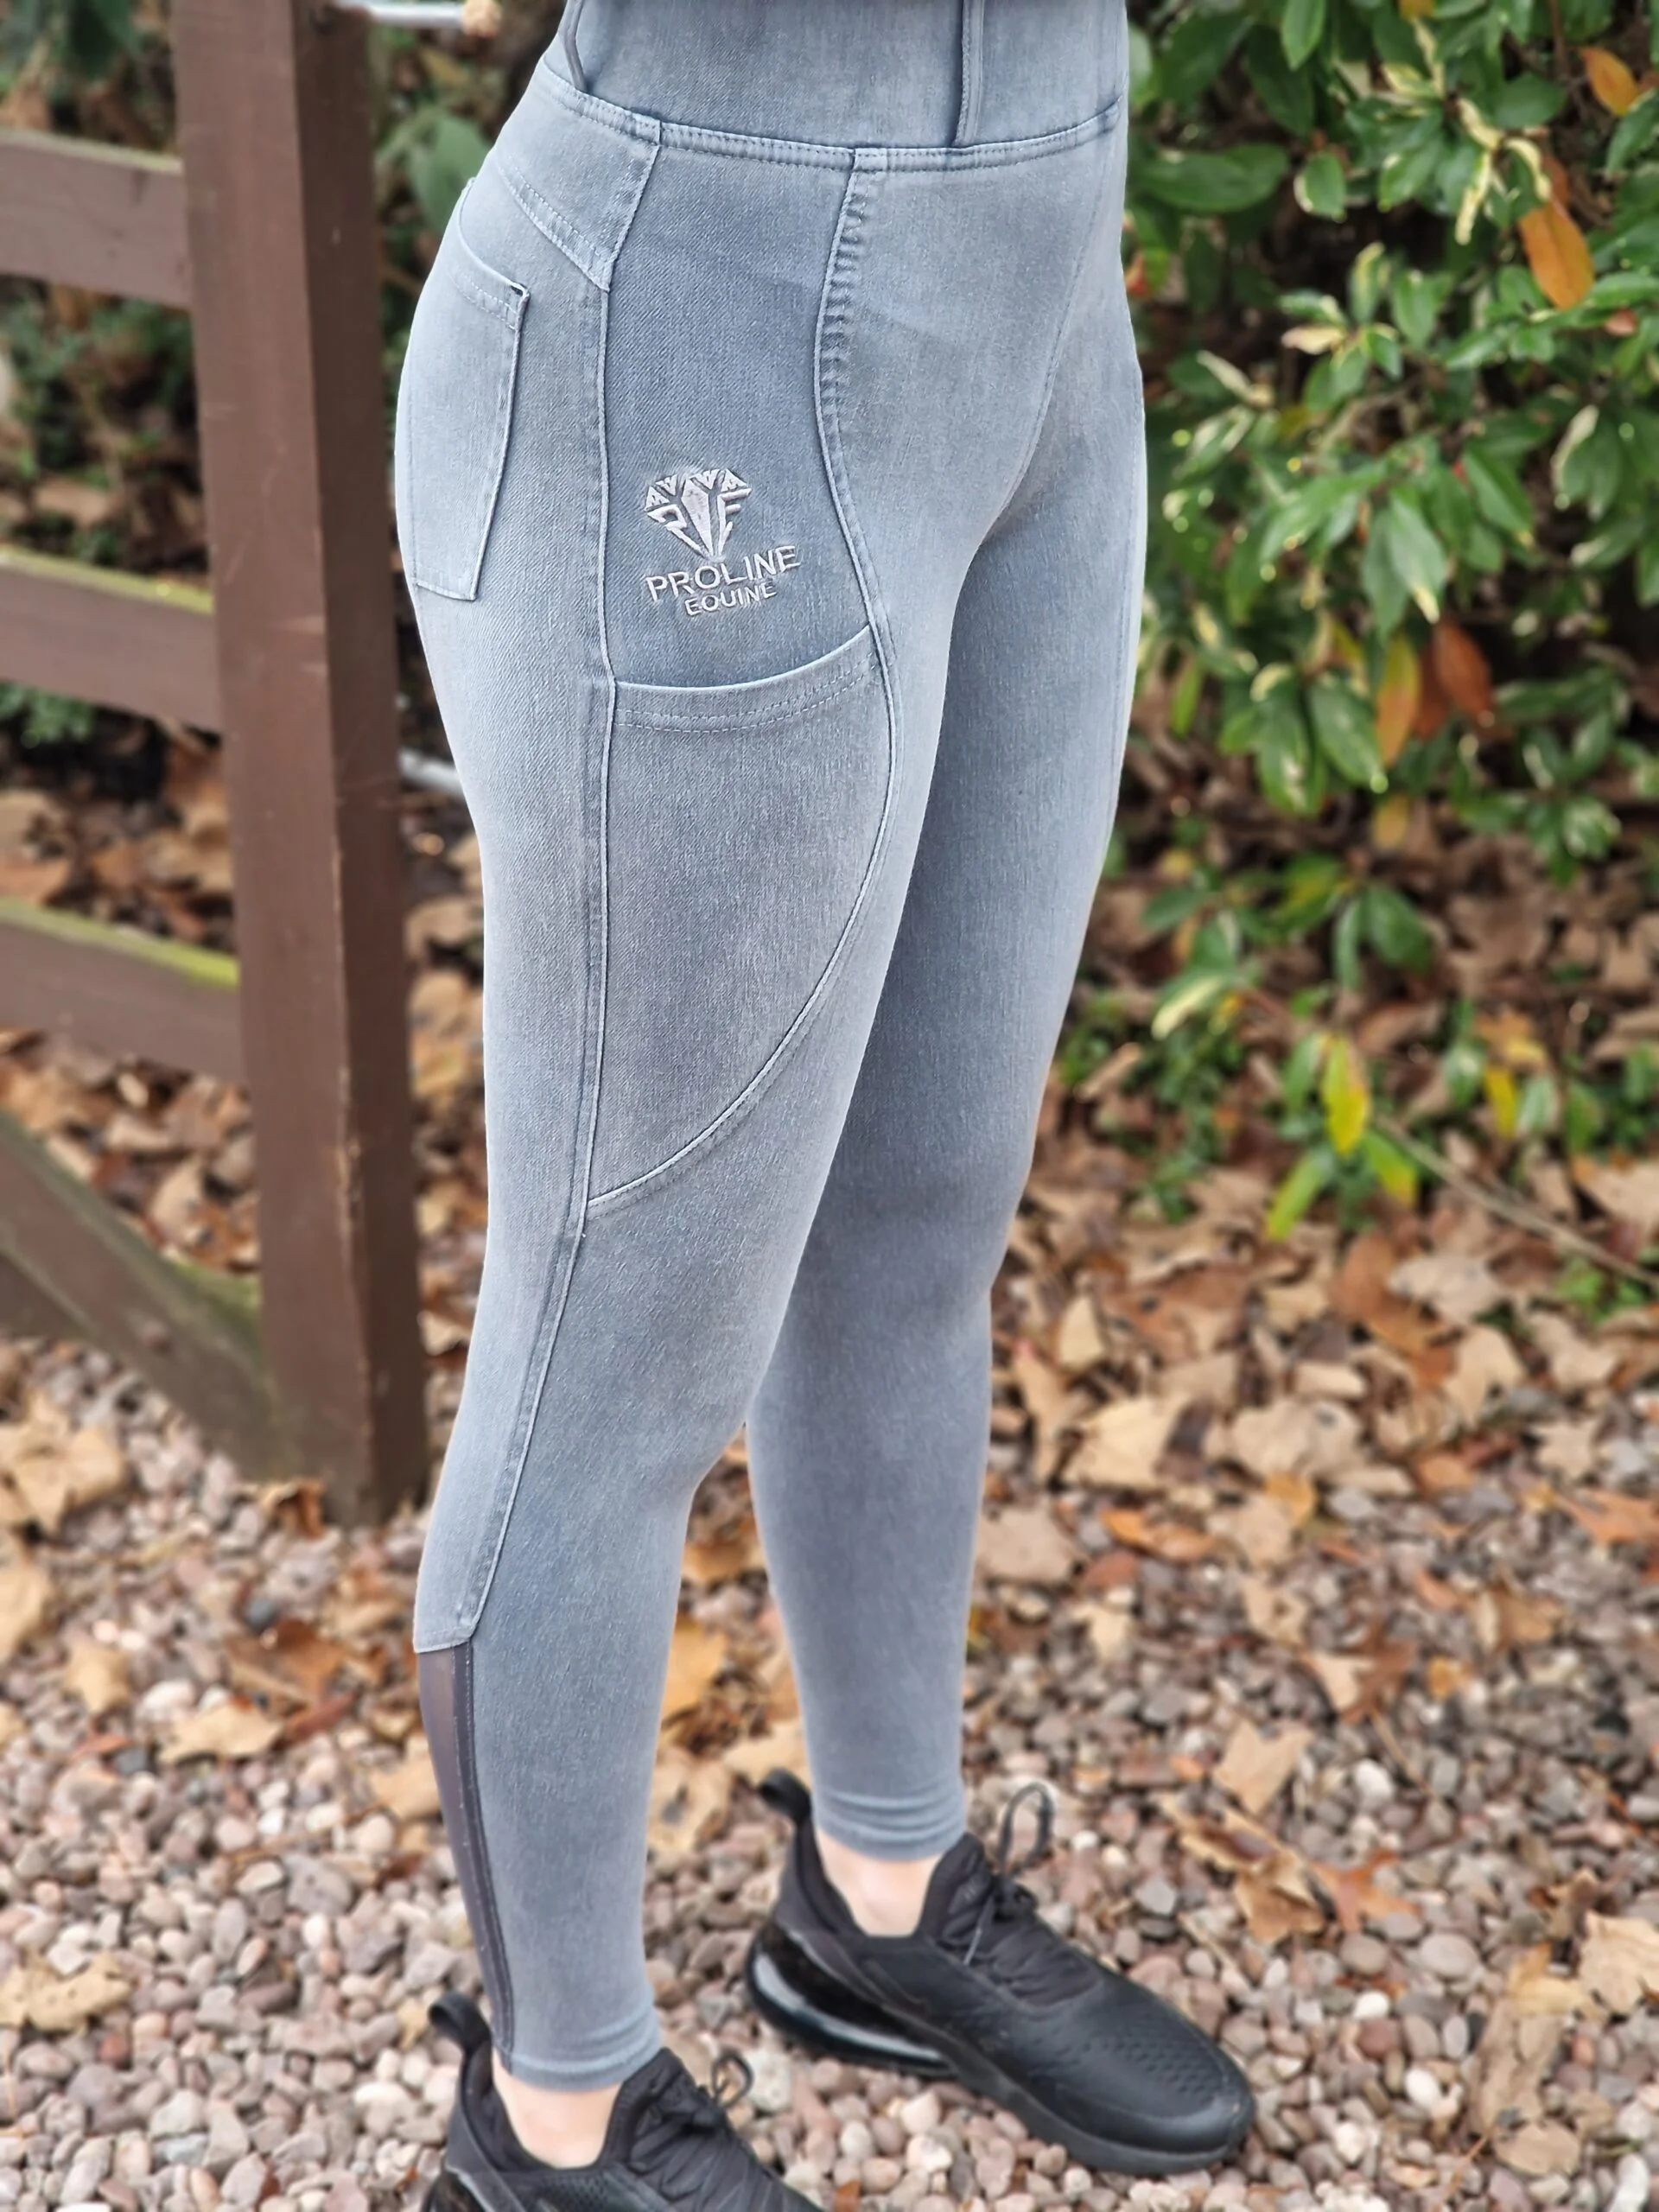 Horse Riding Leggings / Tights / Breeches with phone pockets -NAVY